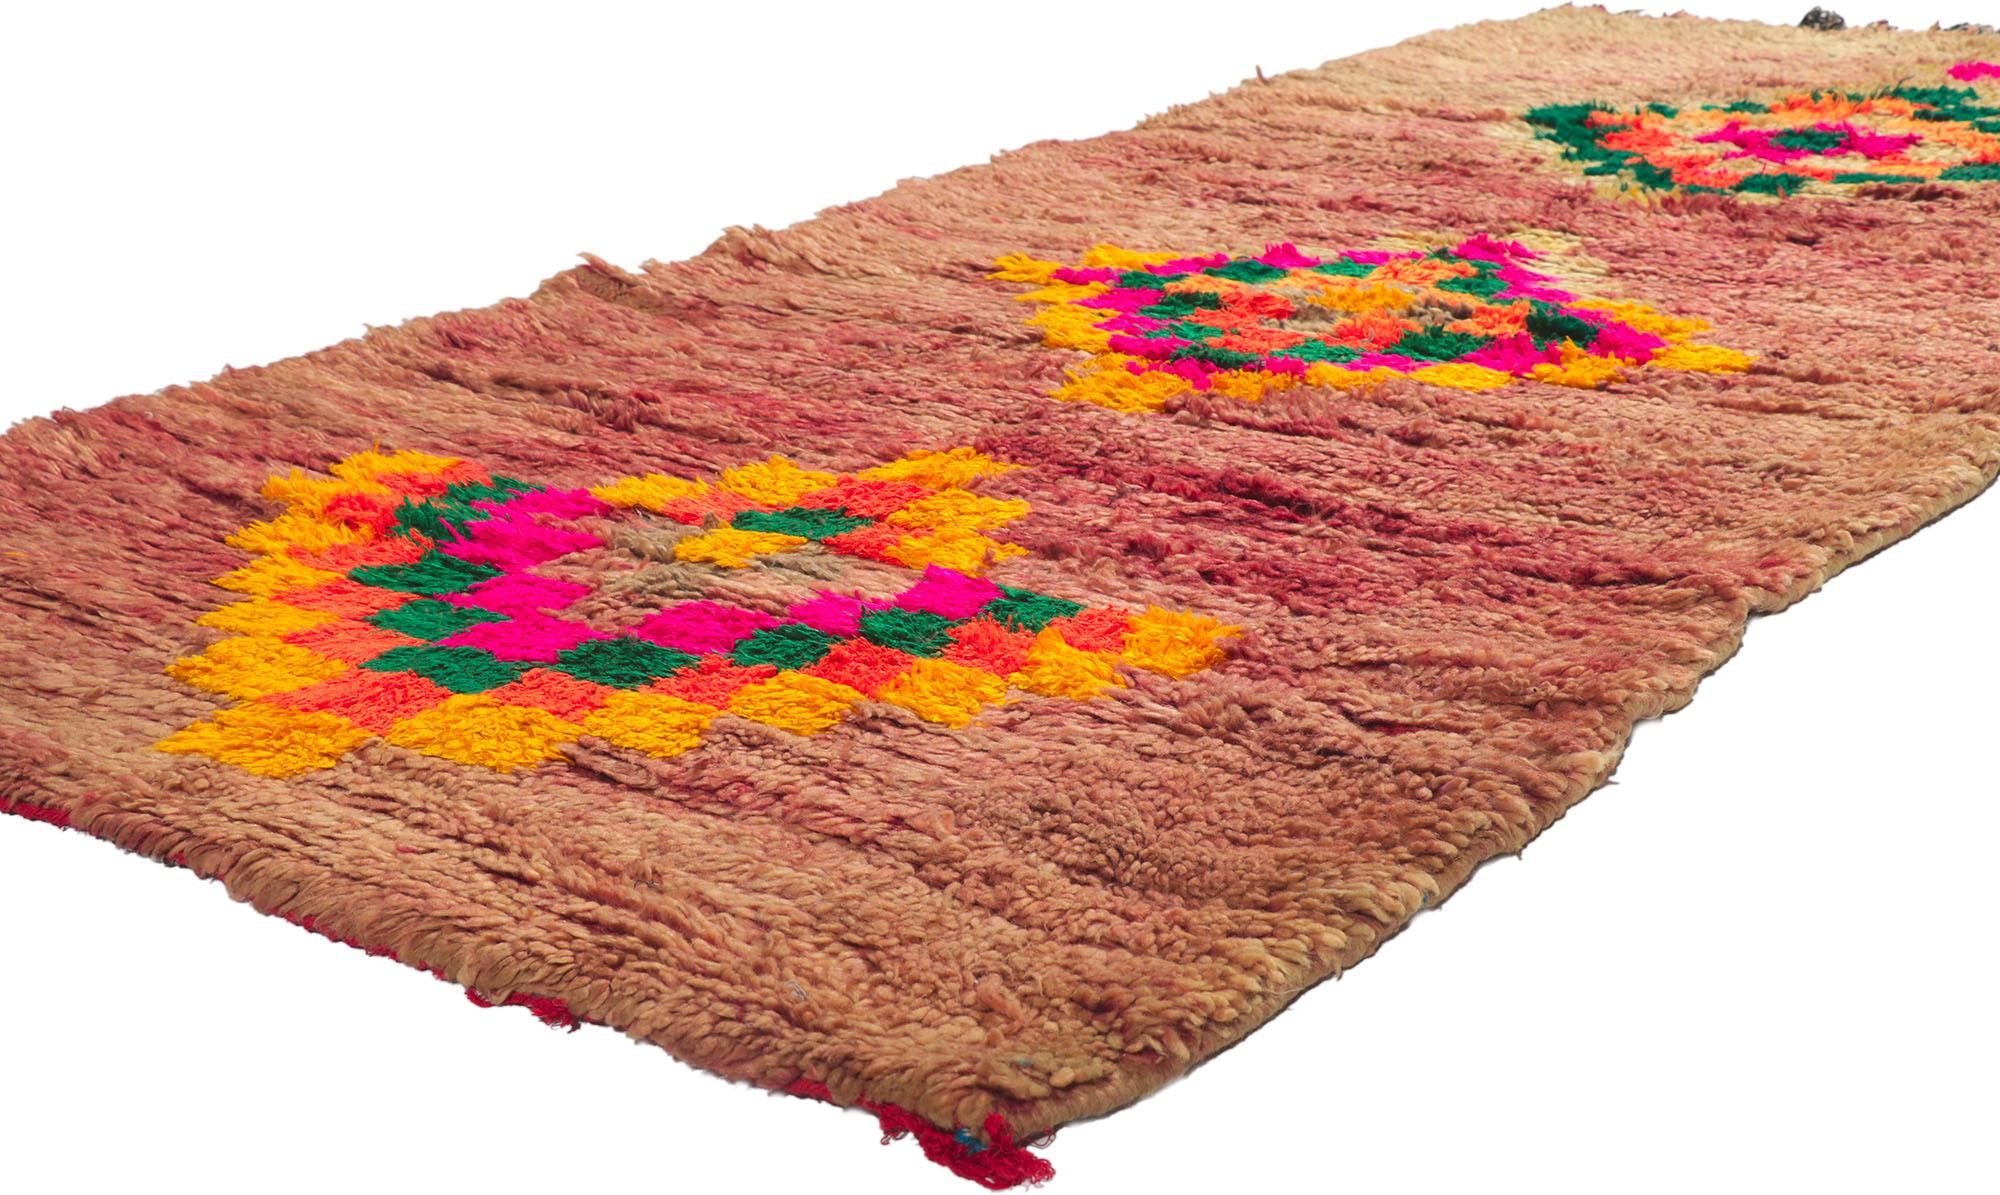 21439 Vintage Moroccan Rug, 04'02 x 08'08.
Gypset chic meets boho glam in this hand knotted wool vintage Moroccan rug. The ambiguous tribal design and bold colors woven into this piece work together creating a happy state of equilibrium. The